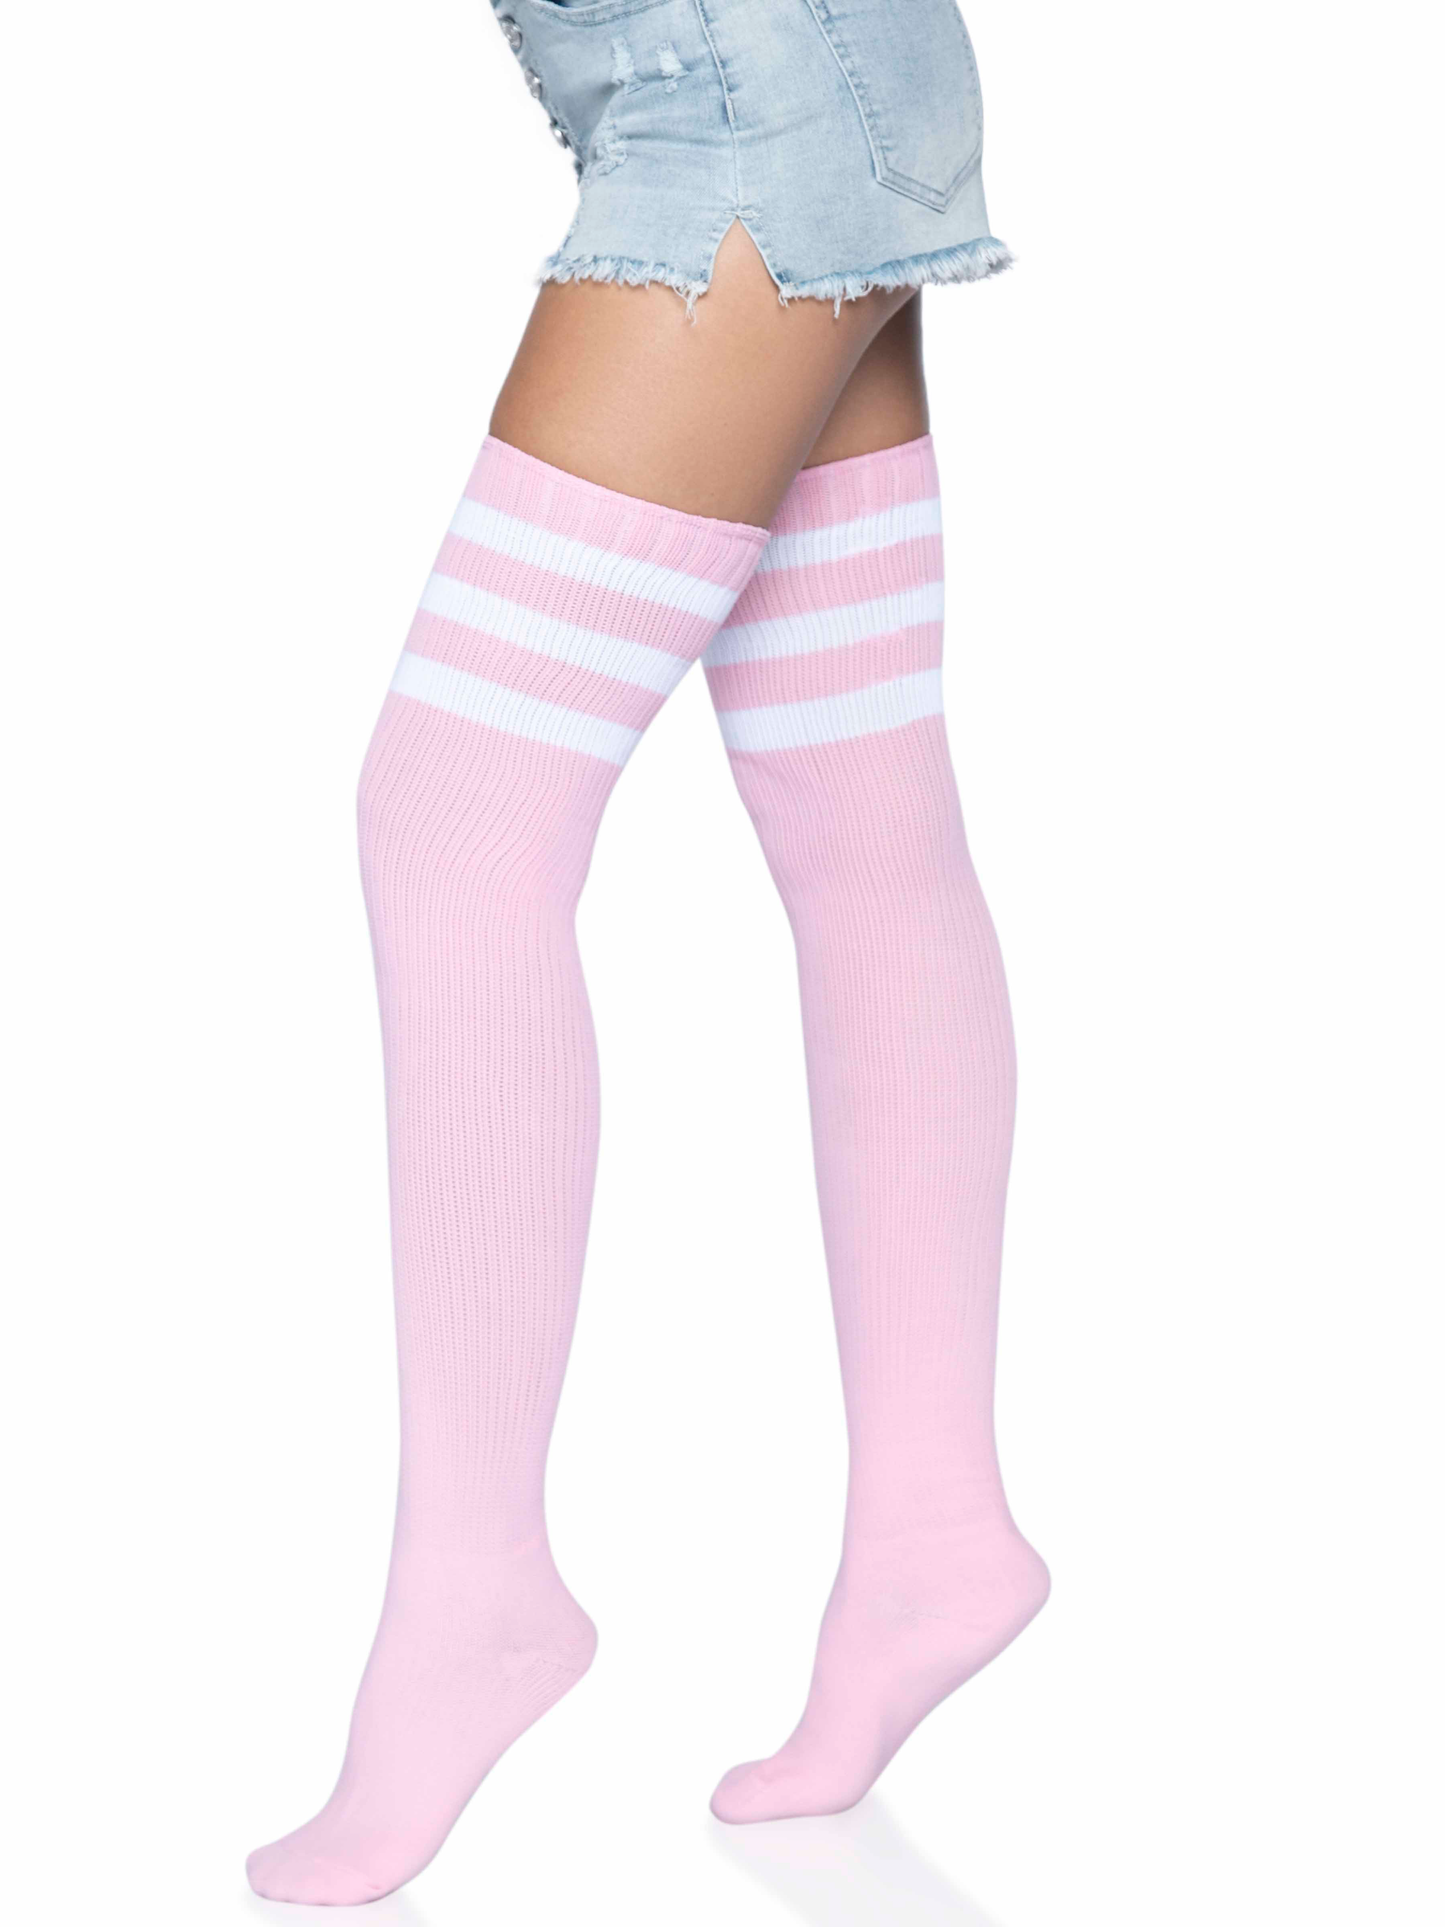 3 stripes athletic ribbed thigh highs one size one size light pink